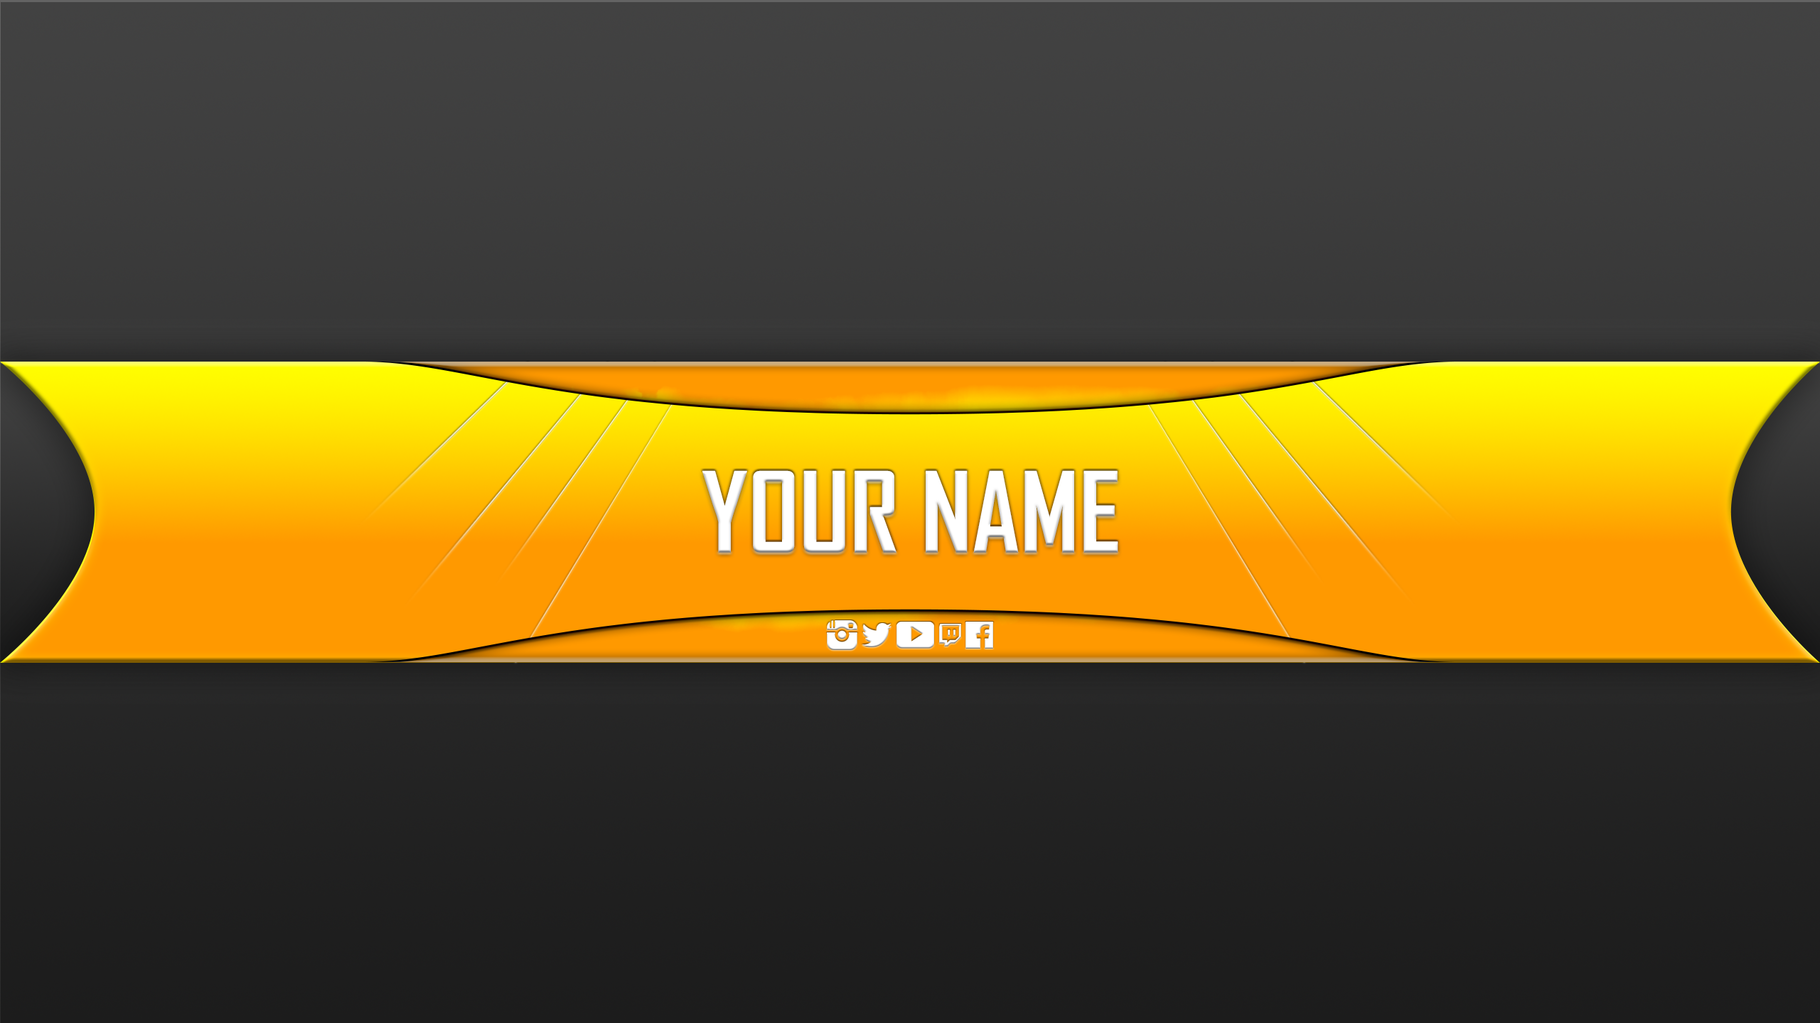 youtube-banner-layout